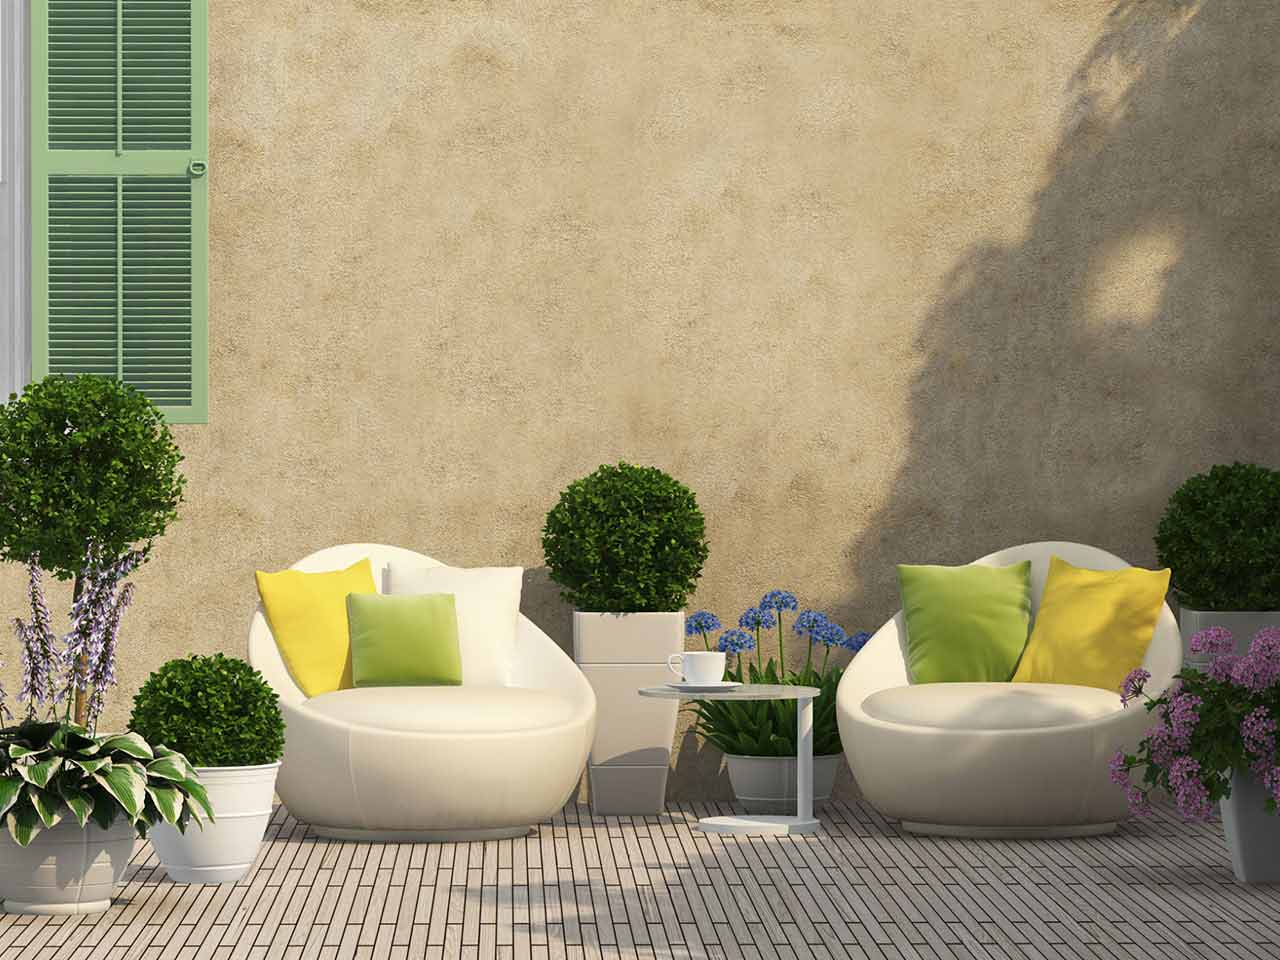 Courtyard garden with furniture and topiary